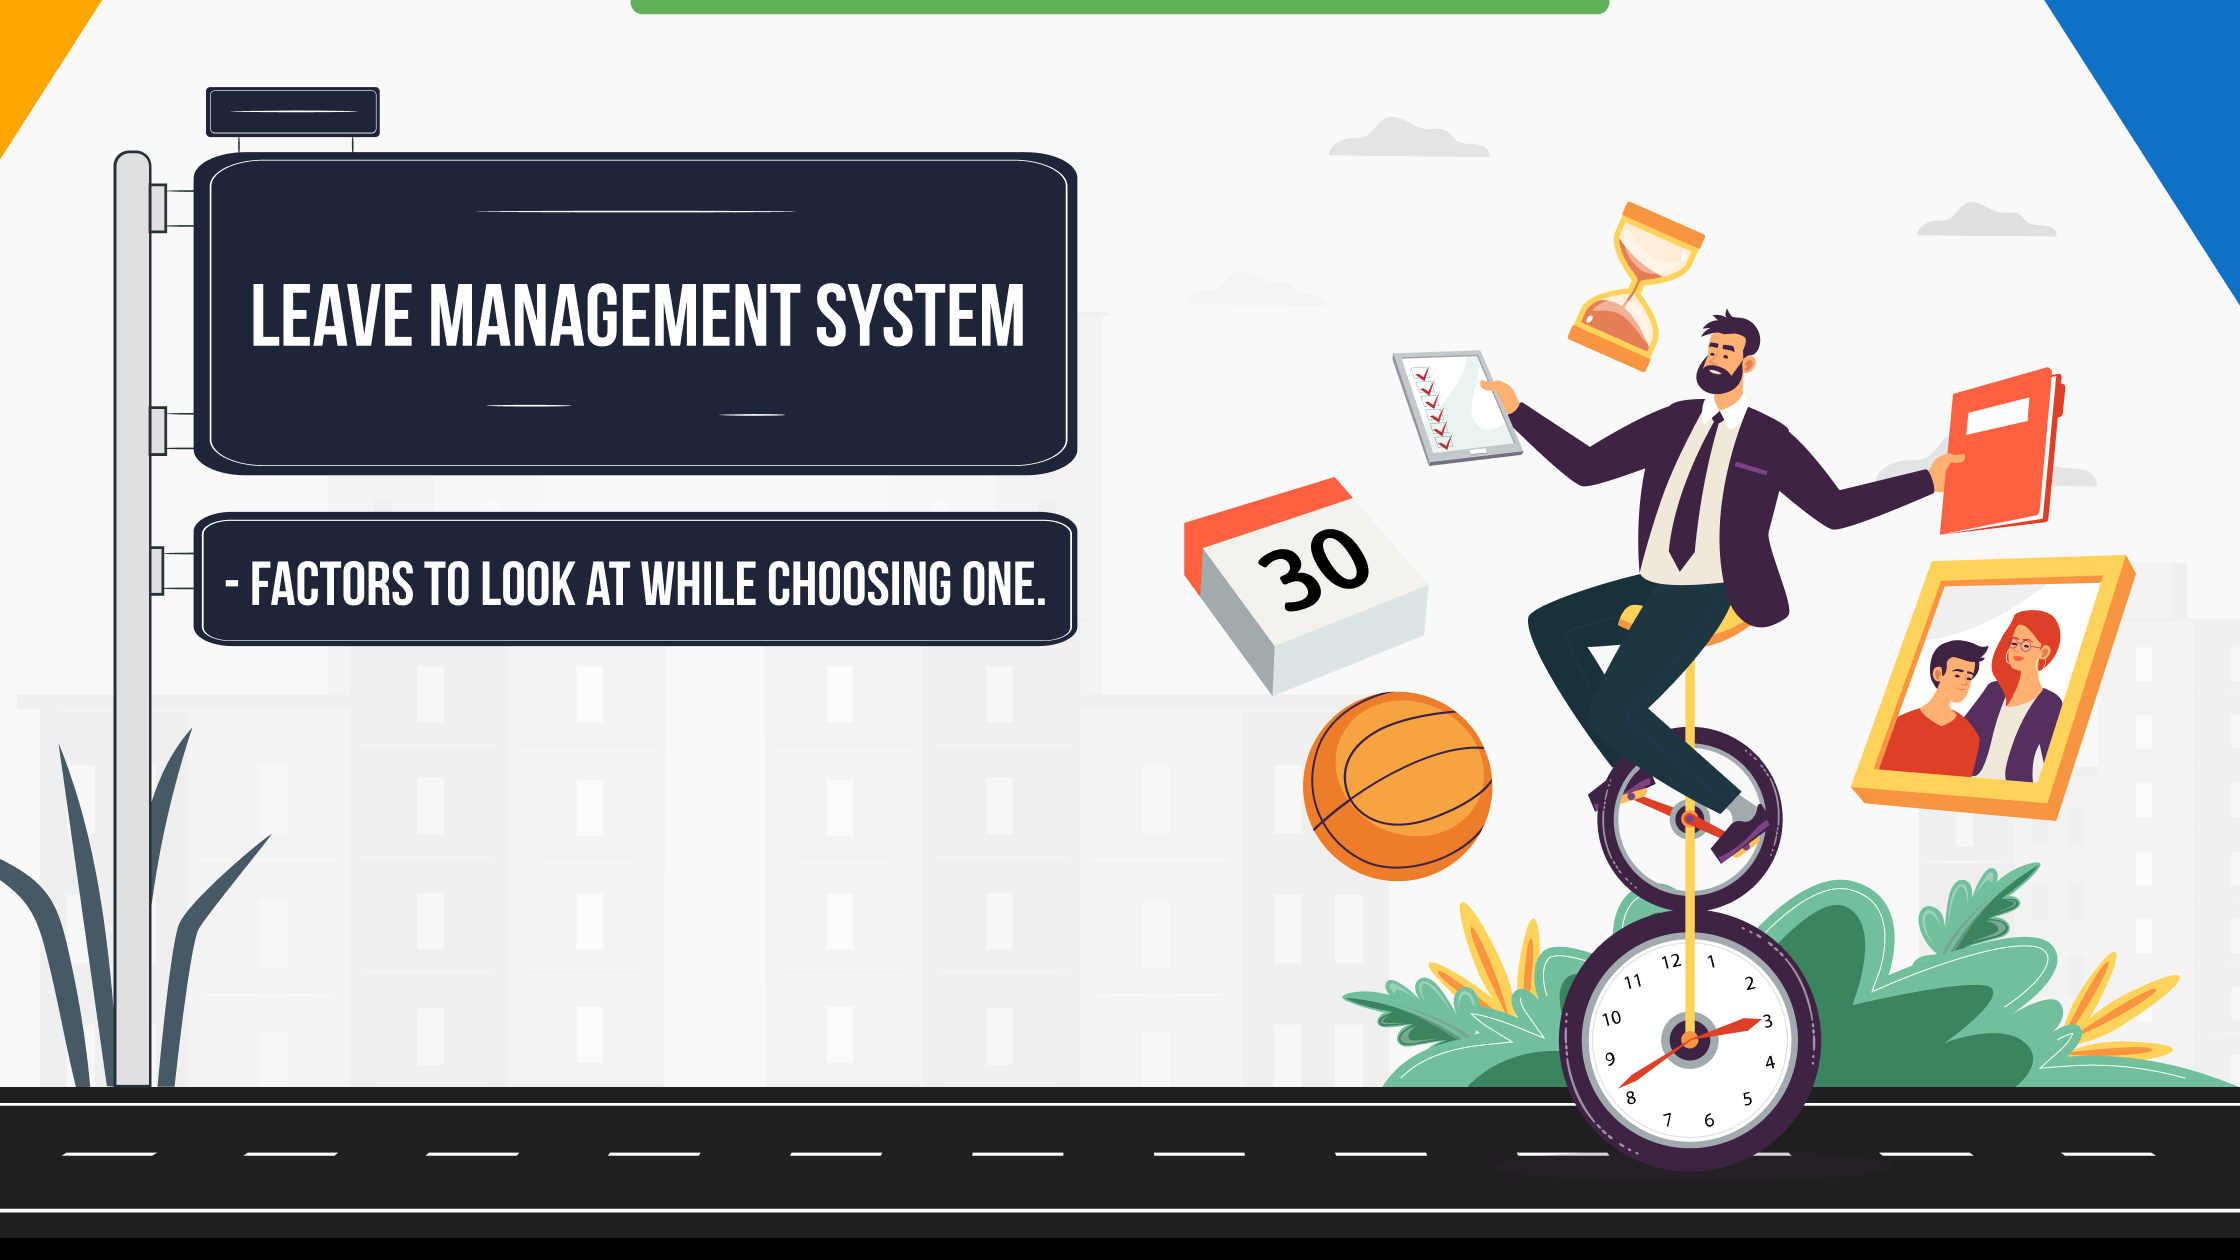 Leave Management System Factors to Look at While Choosing One.